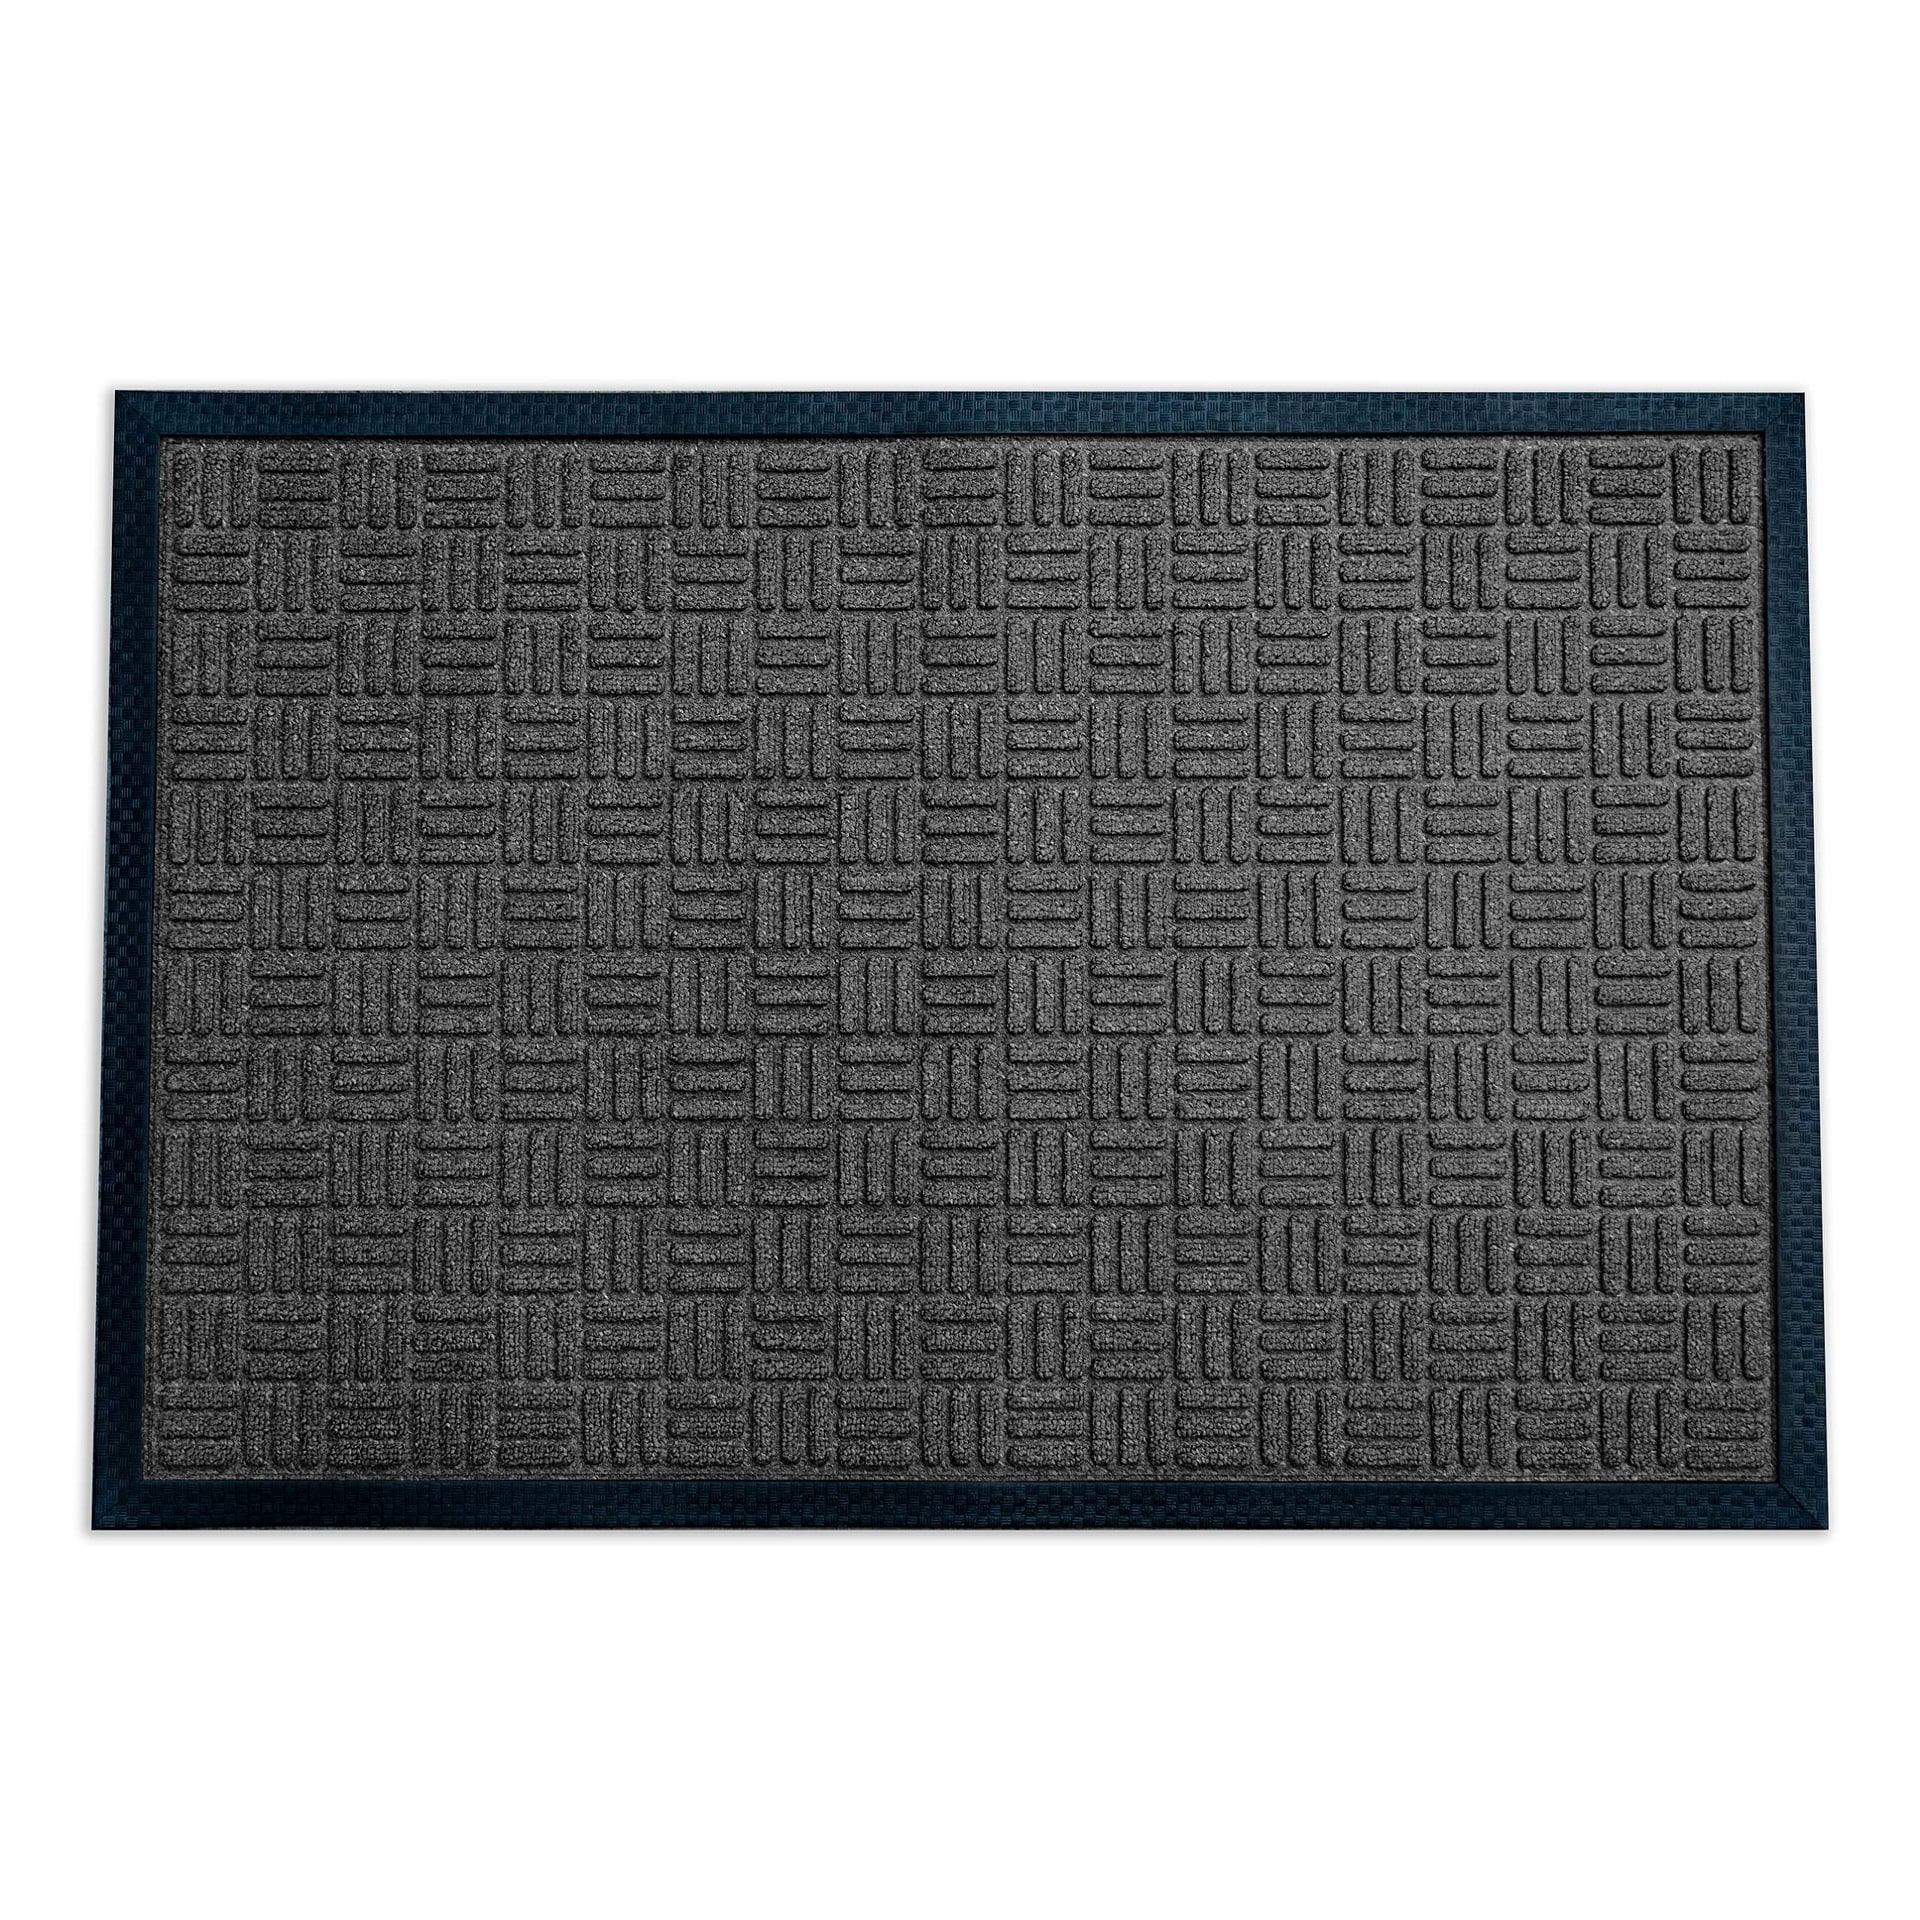 https://ak1.ostkcdn.com/images/products/is/images/direct/0775328aa36d077aede66685abb46bf94a4ae5aa/Envelor-Door-Mat-Indoor-Outdoor-Low-Profile-Commercial-Entryway-Rug.jpg